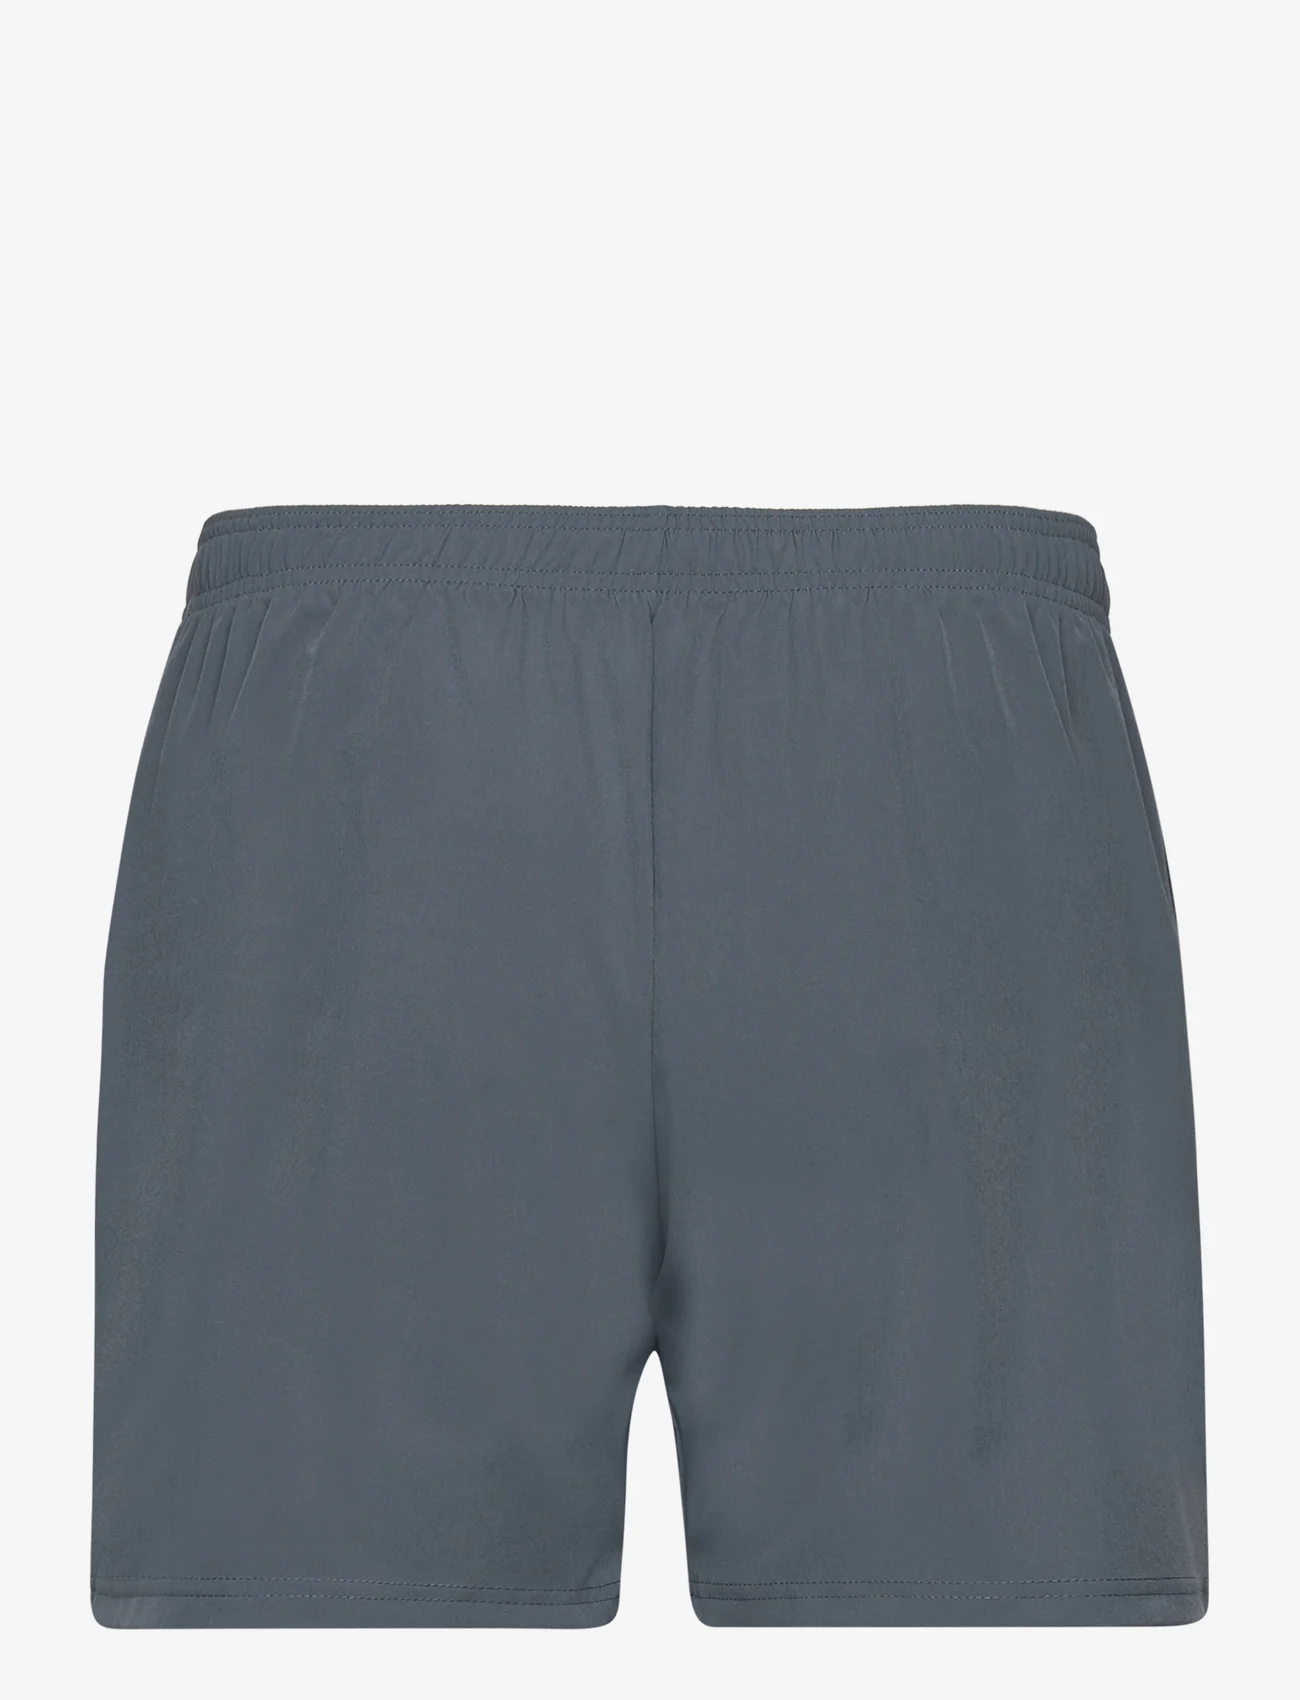 Björn Borg - BORG ESSENTIAL ACTIVE SHORTS - lowest prices - stormy weather - 1